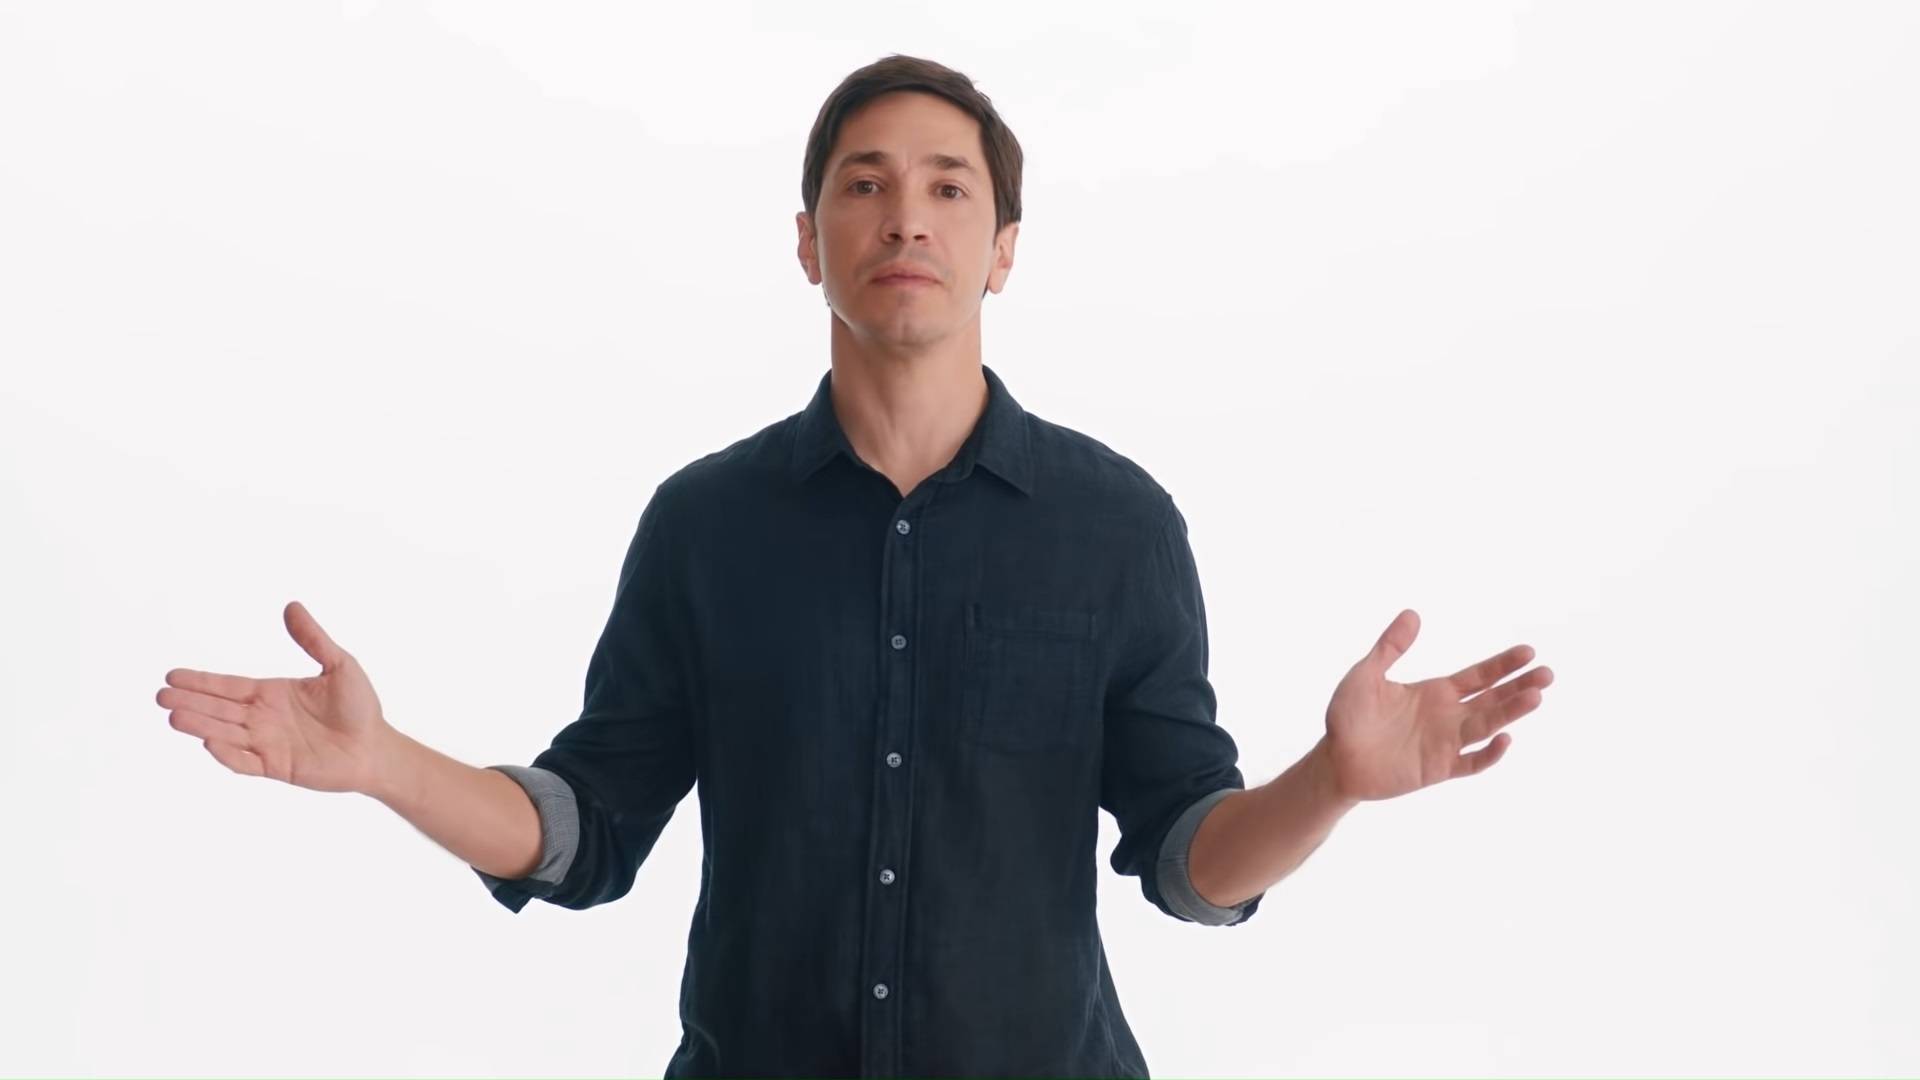 Intel hired the ‘I’m a Mac’ man to advertise PCs and form enjoyable of Apple